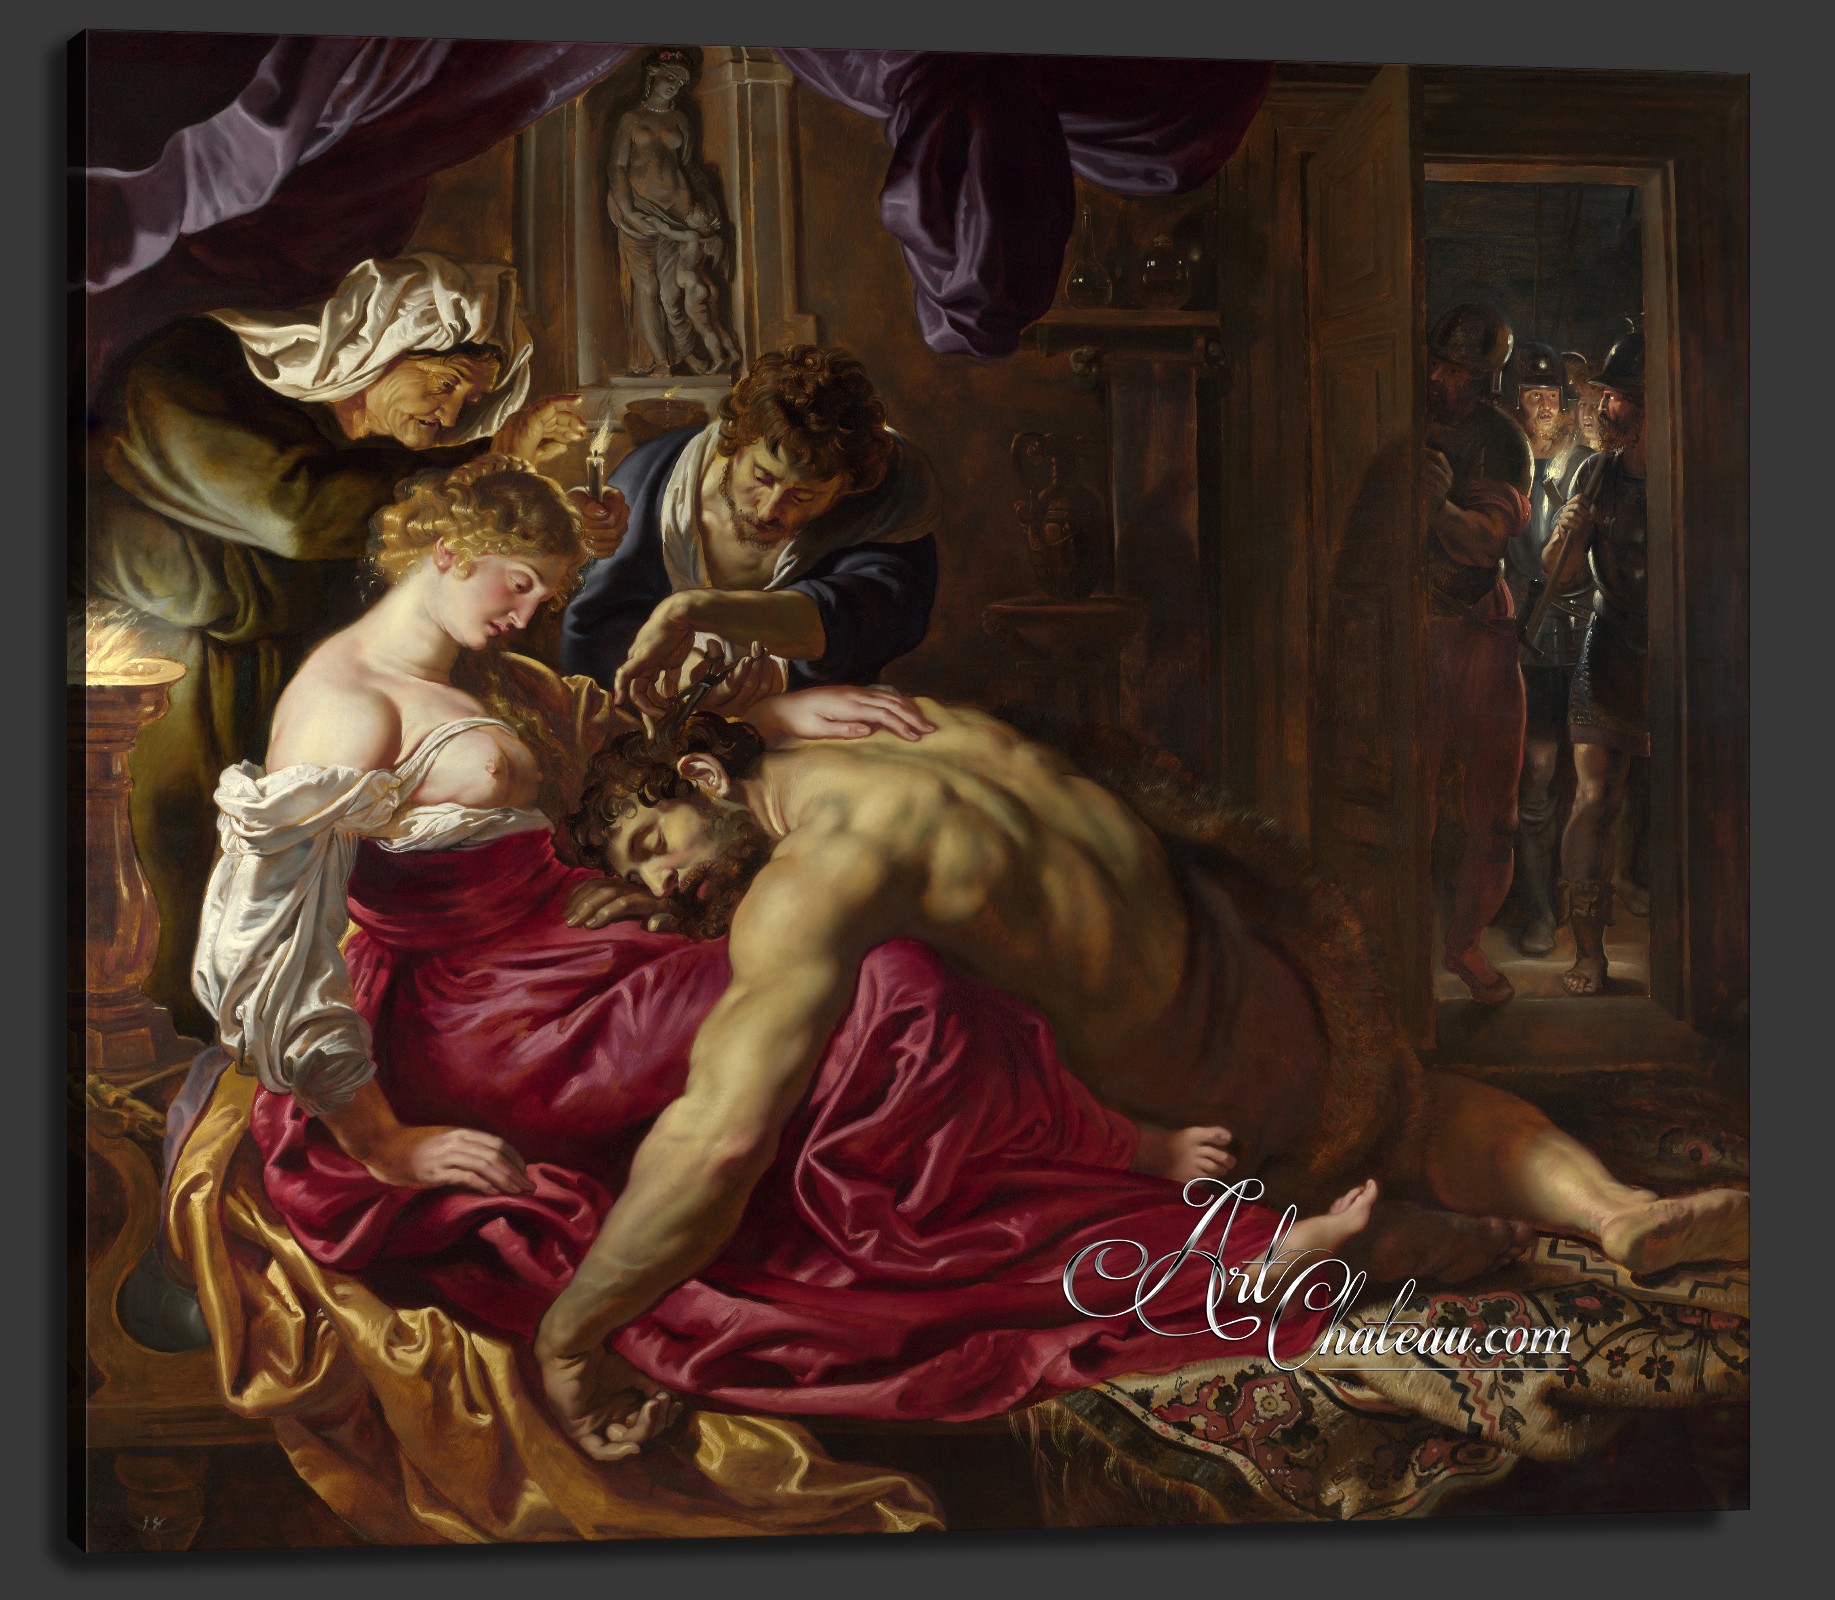 Samson and Delilah, after Peter Paul Rubens